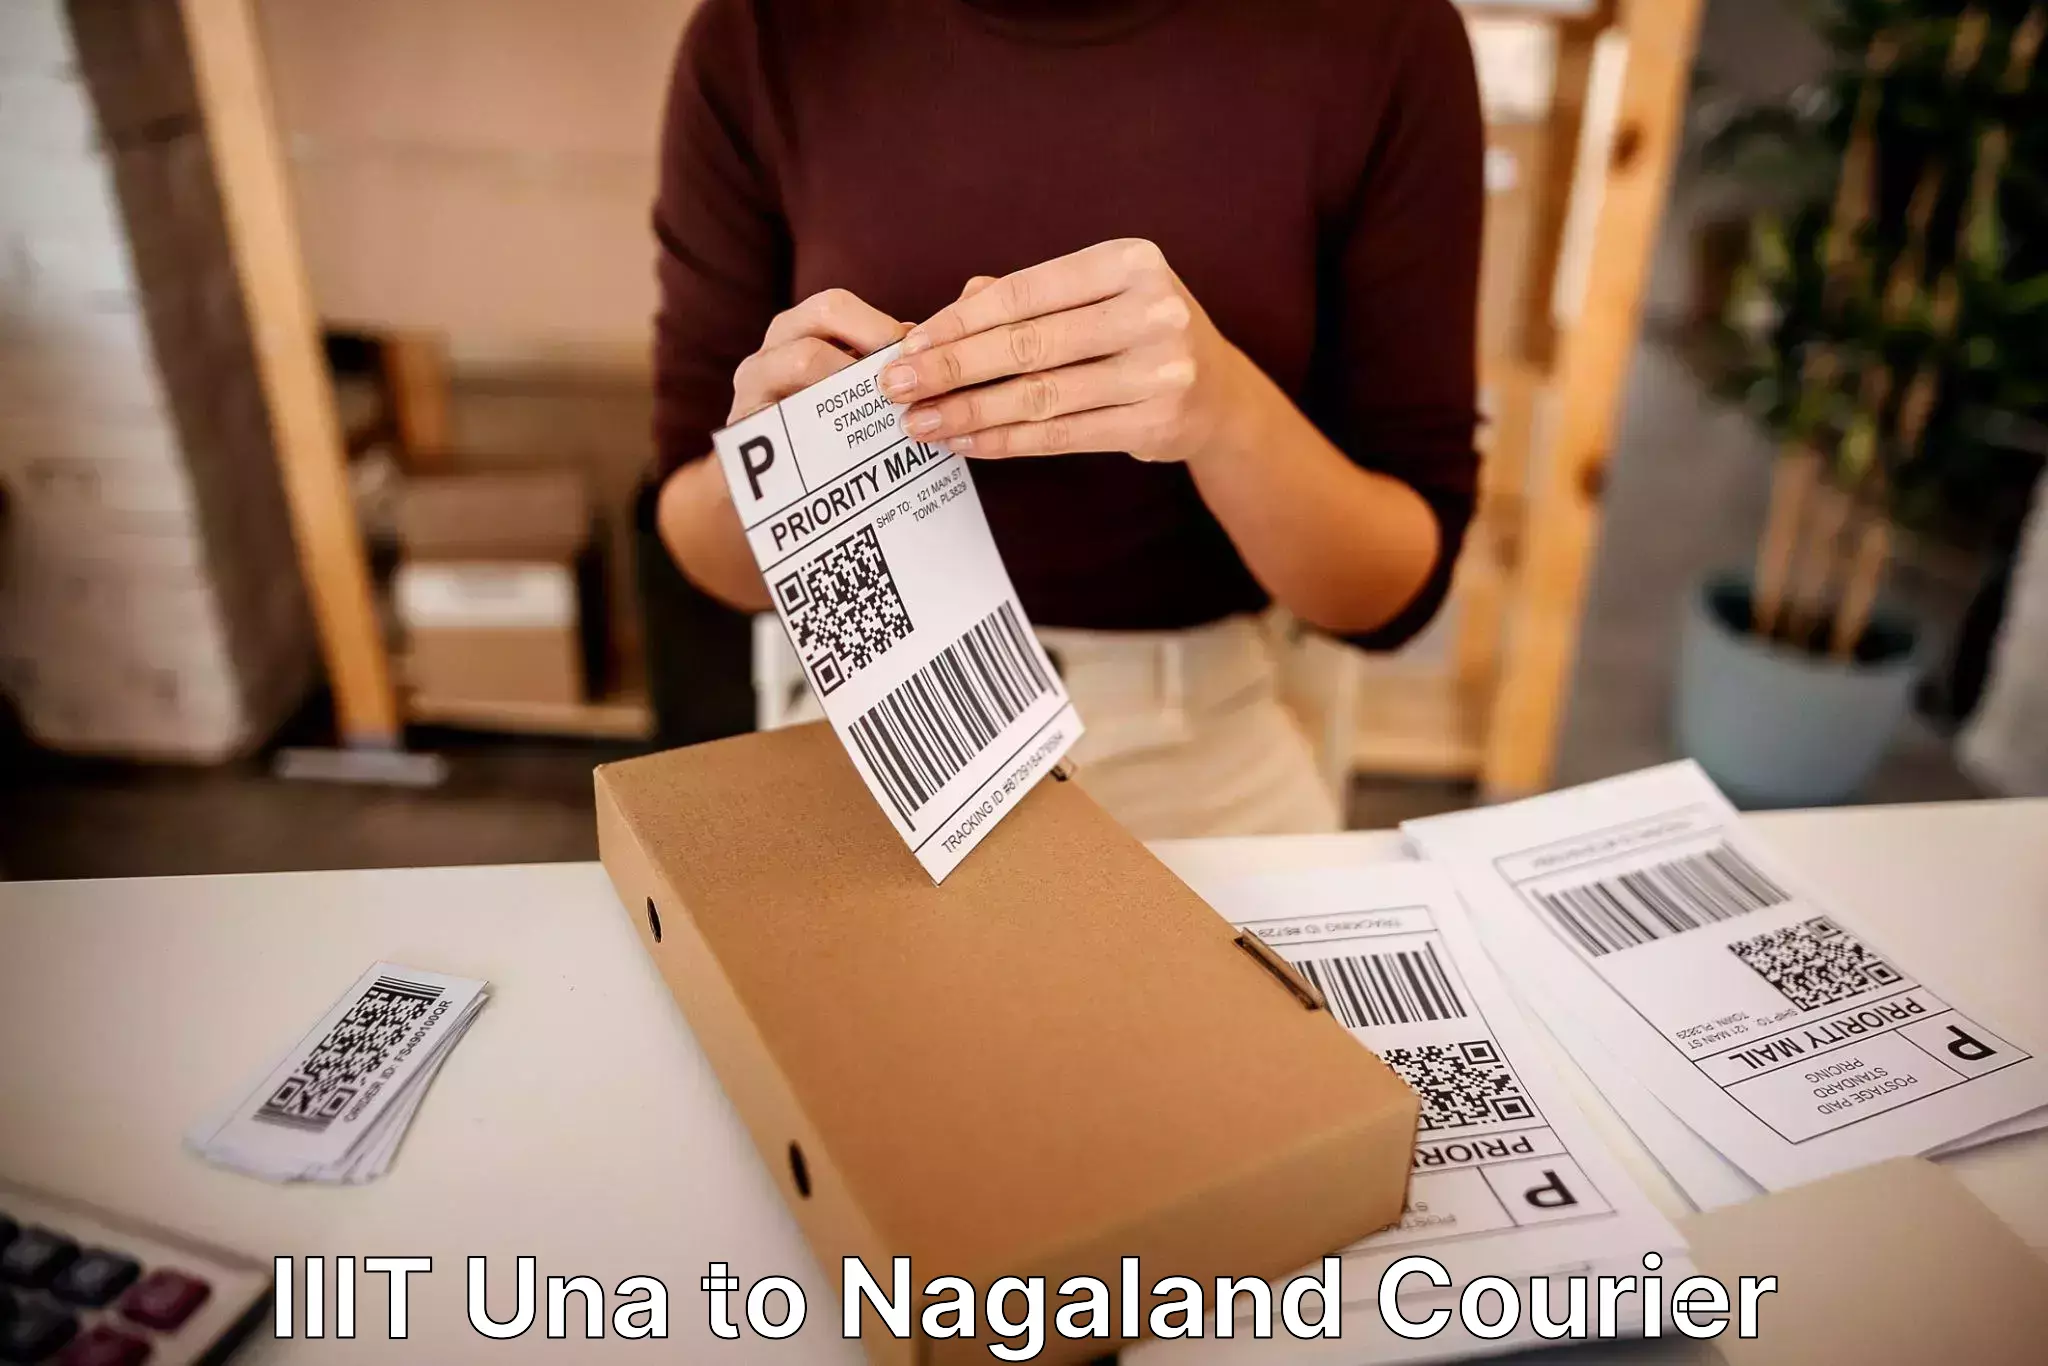 Professional moving assistance IIIT Una to Nagaland